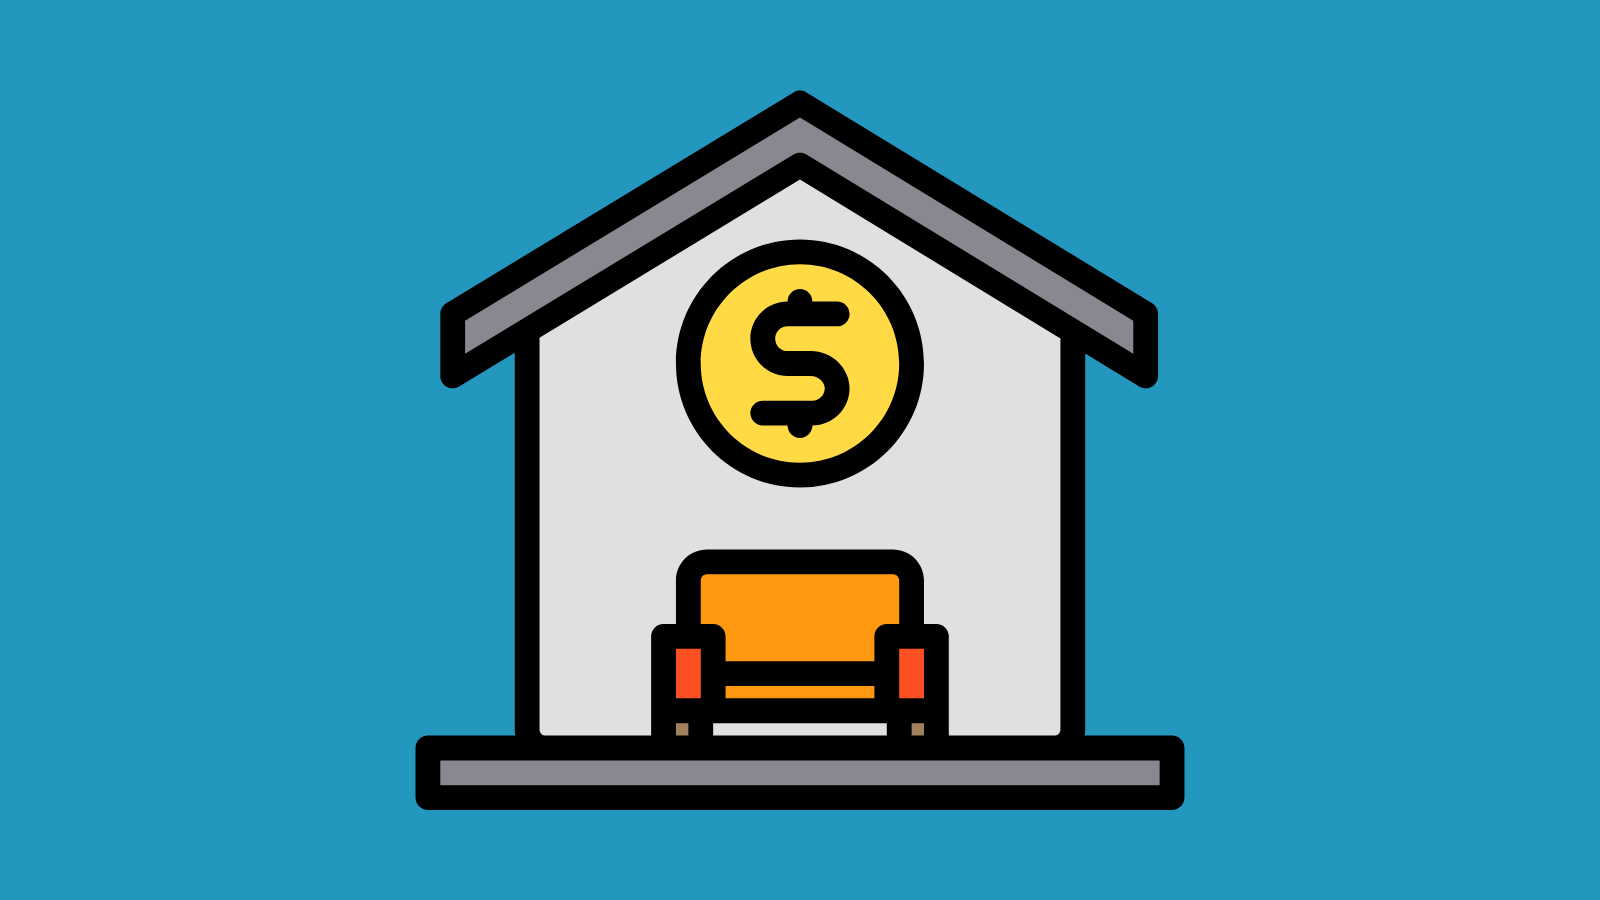 An icon of a house with a couch and a dollar sign floating above it inside